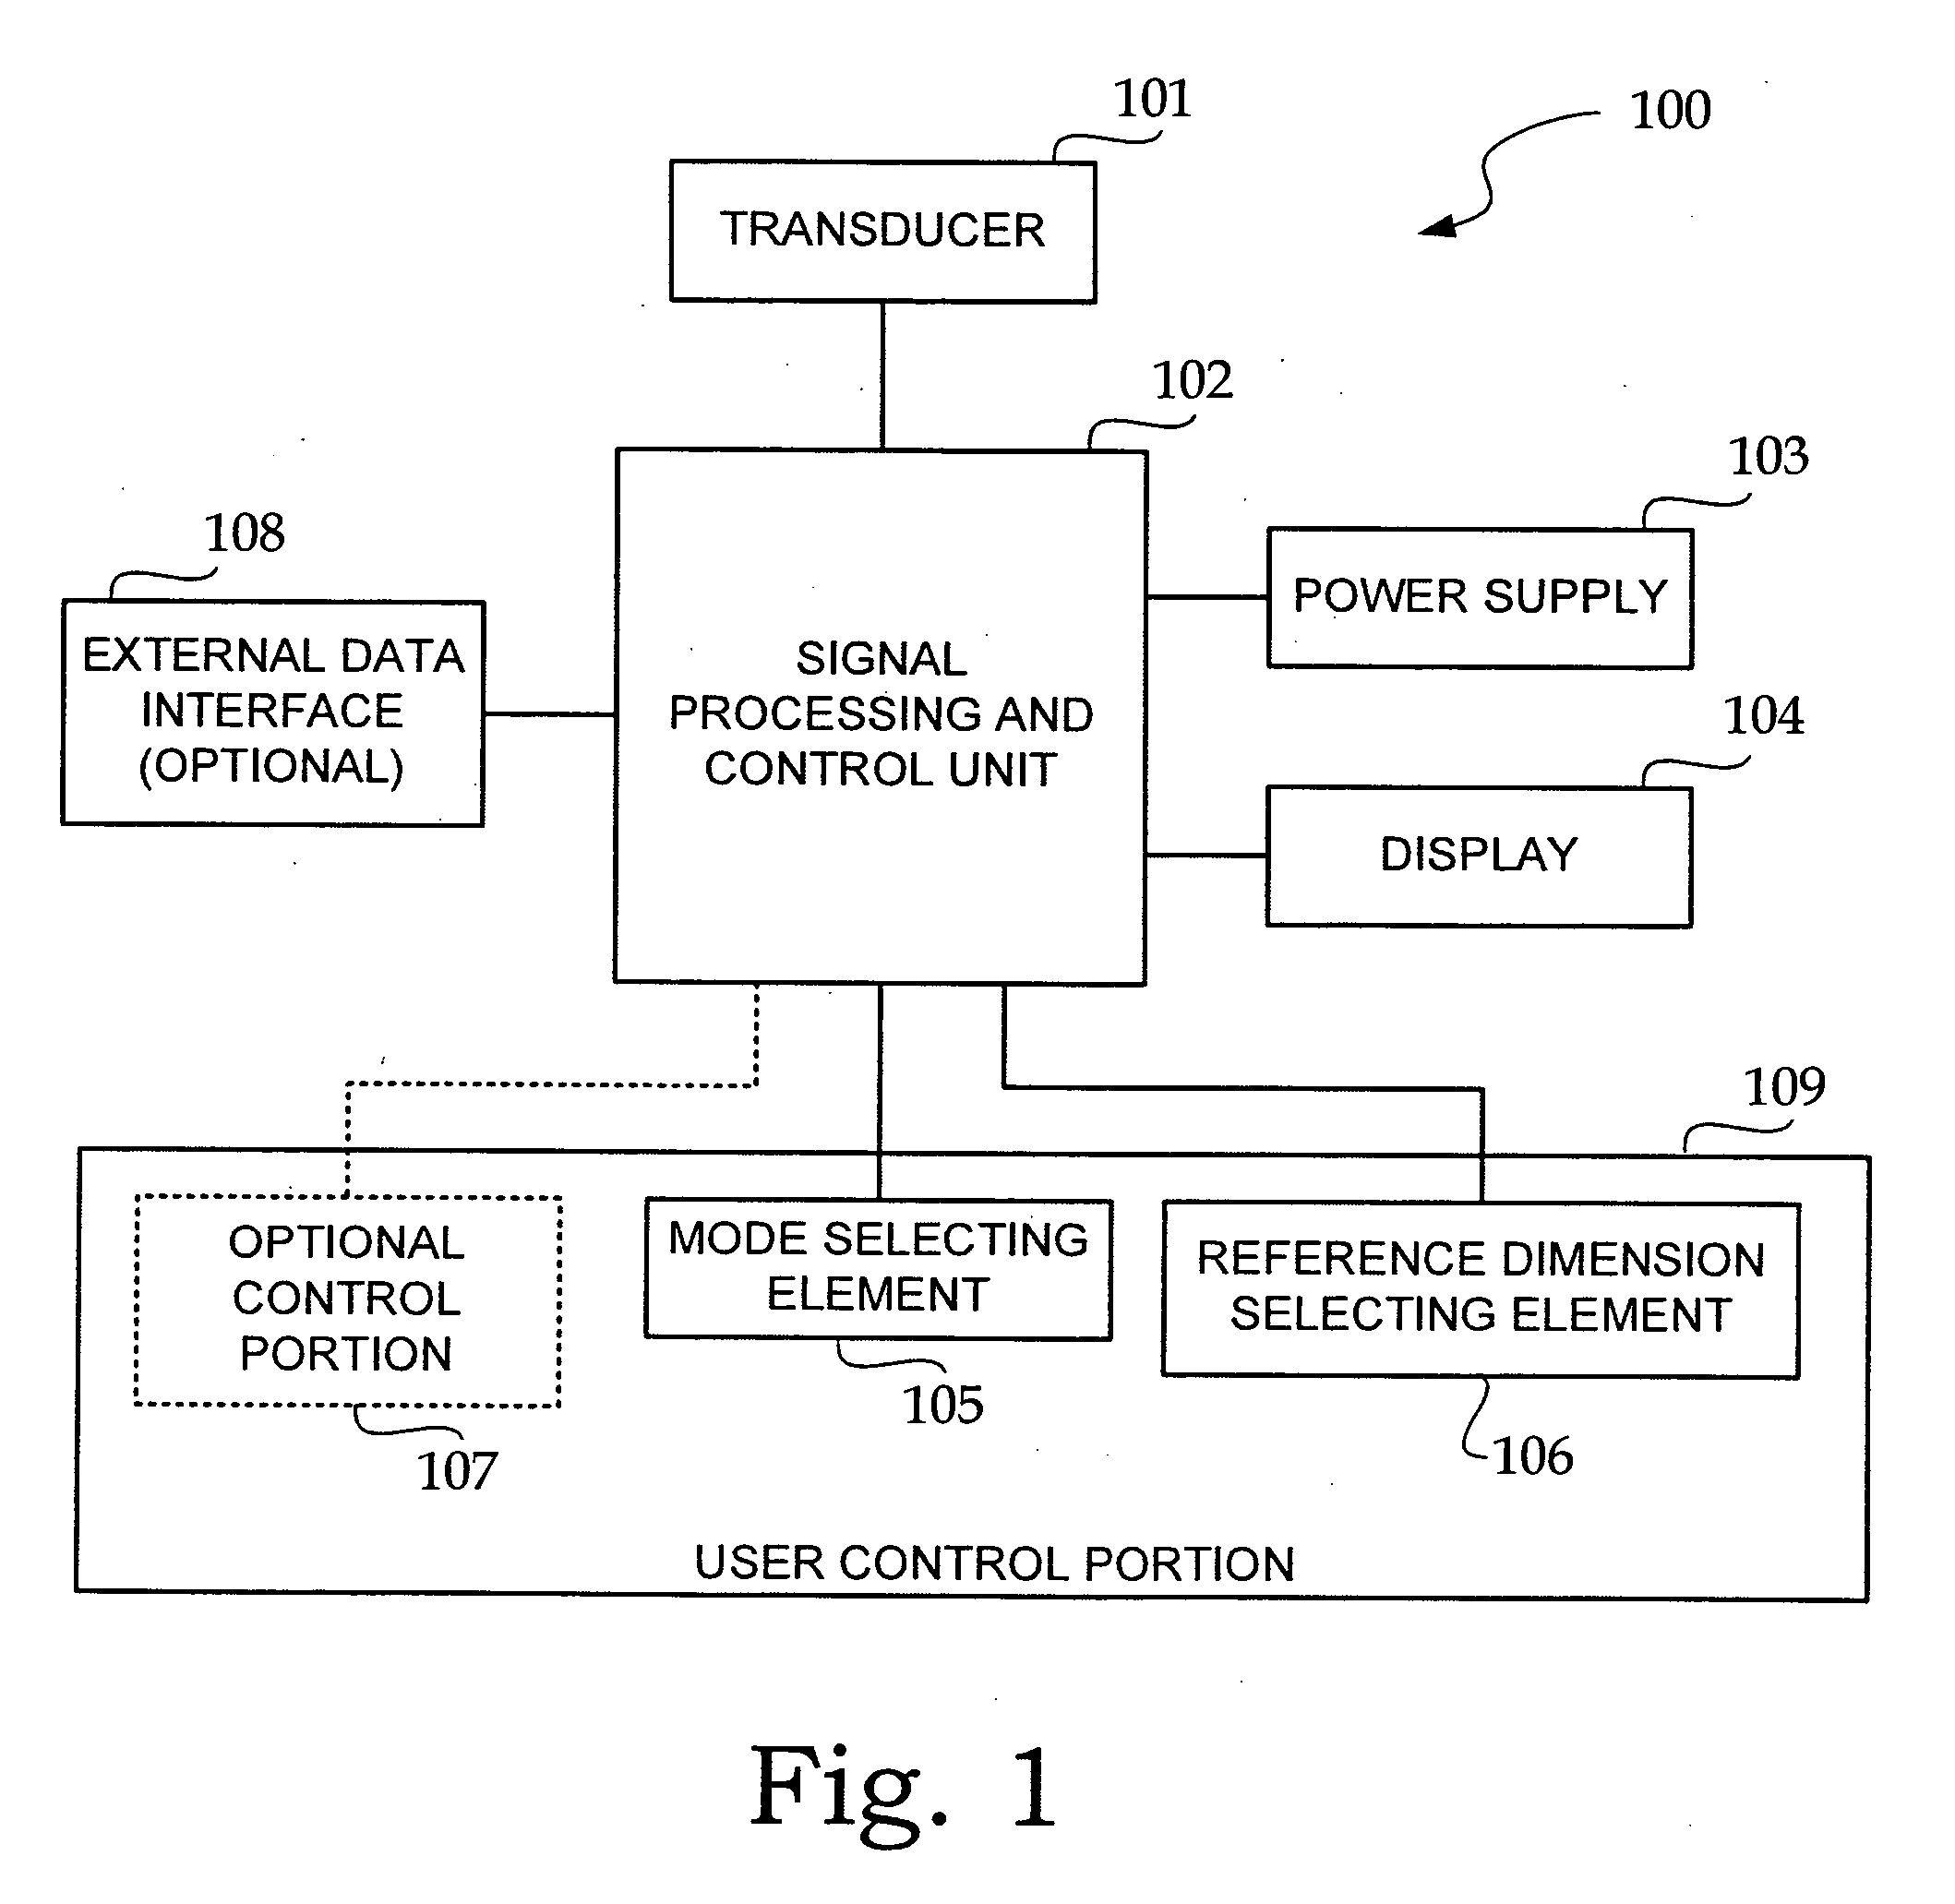 Multimode electronic calipers having ratiometric mode and simplified user interface